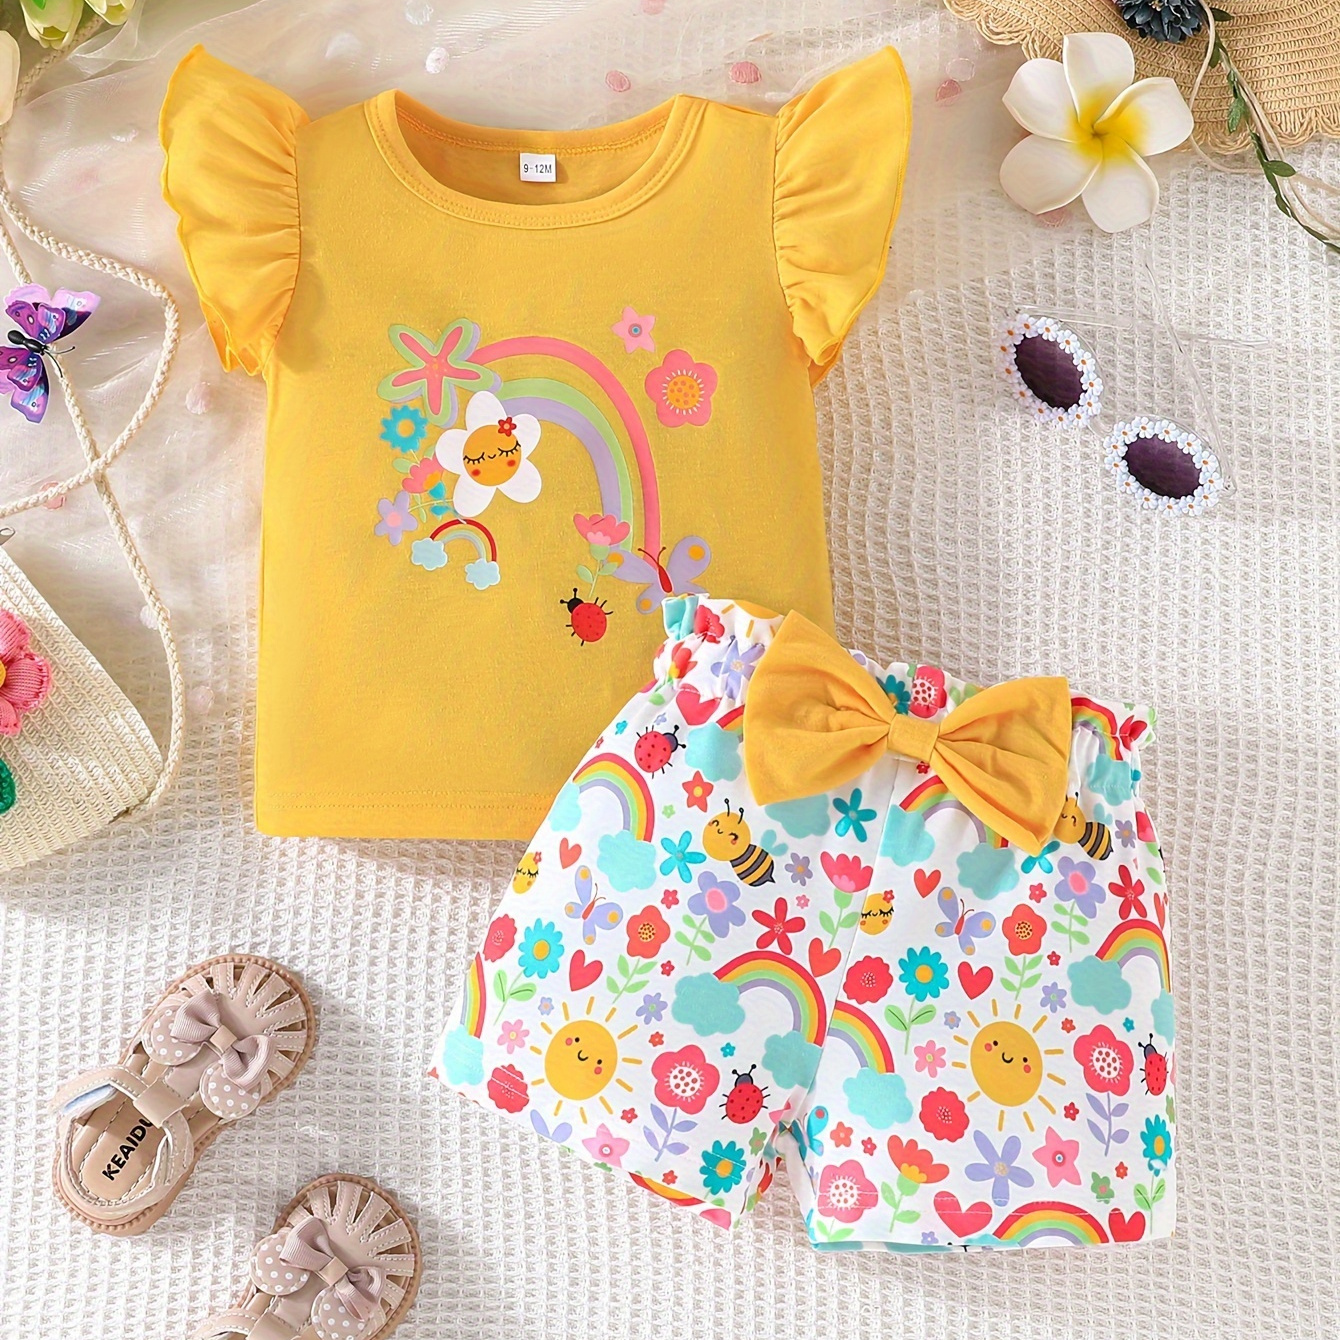 

2pcs Baby's Cartoon Rainbow Print Cap Sleeve Top & Bowknot Decor Shorts Set, Toddler & Infant Girl's Clothes For Summer Daily Wear